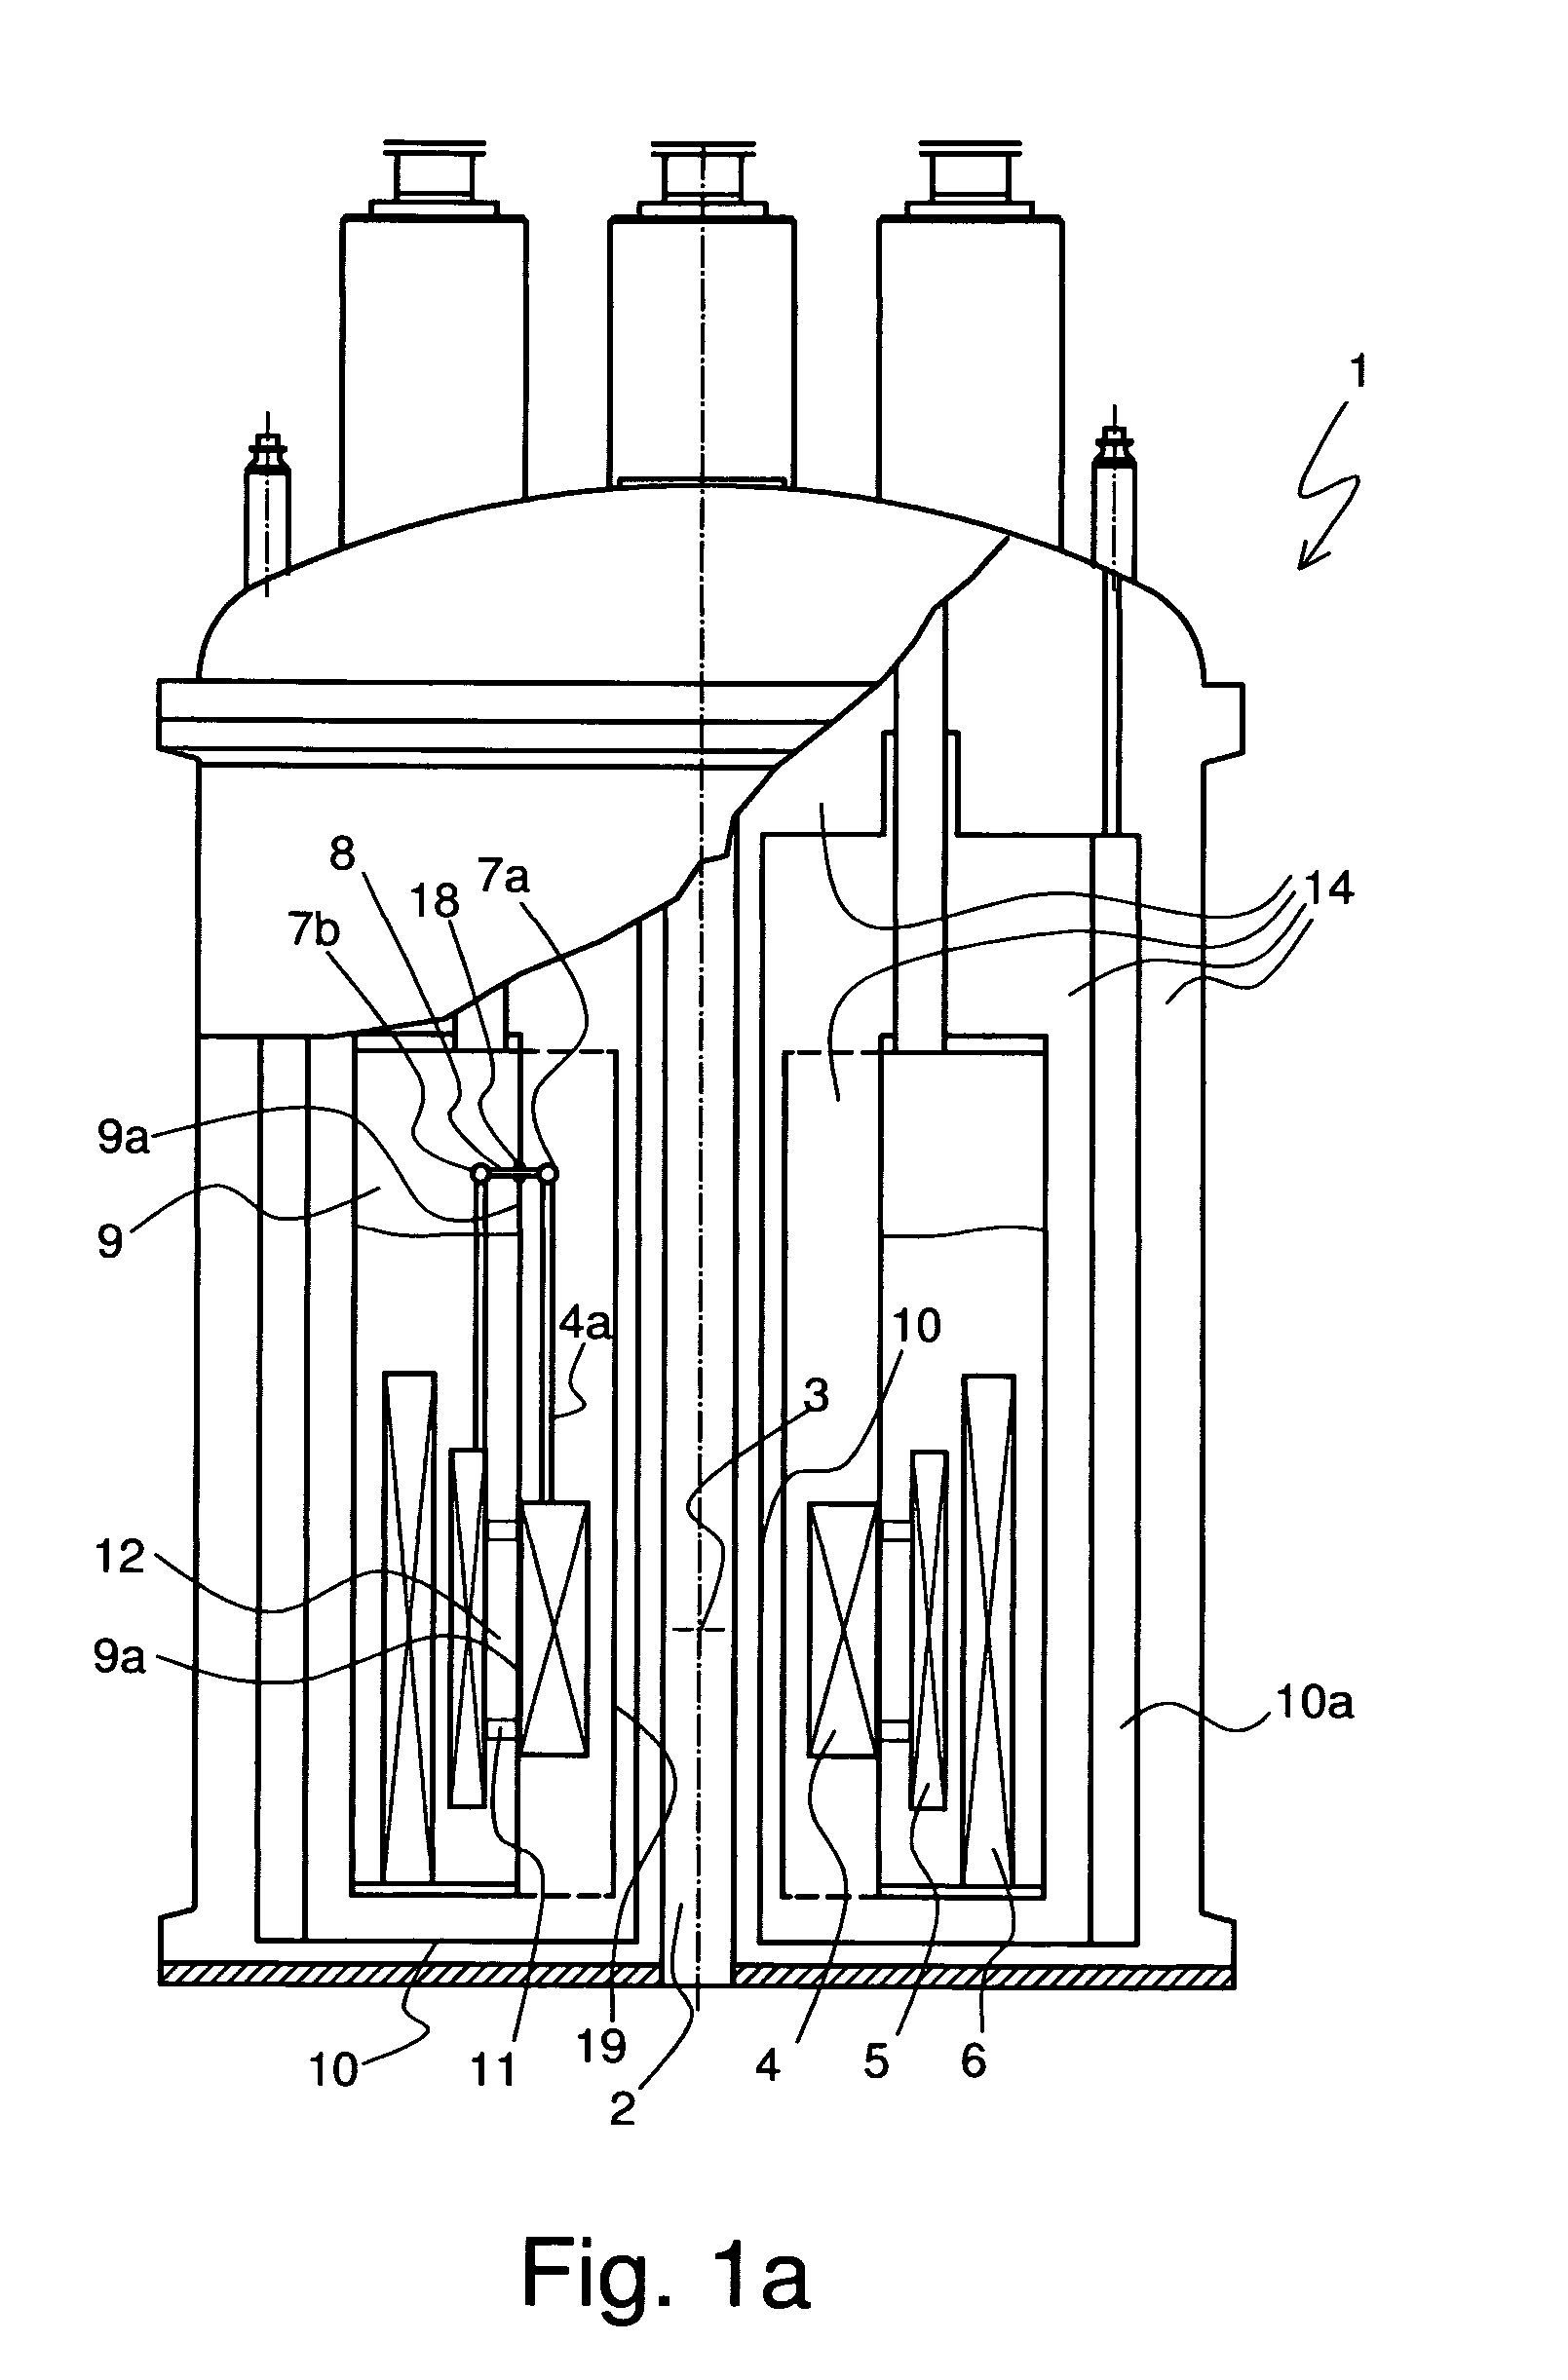 Cryostat having a magnet coil system, which comprises an LTS section and an HTS section, which is arranged in the vacuum part